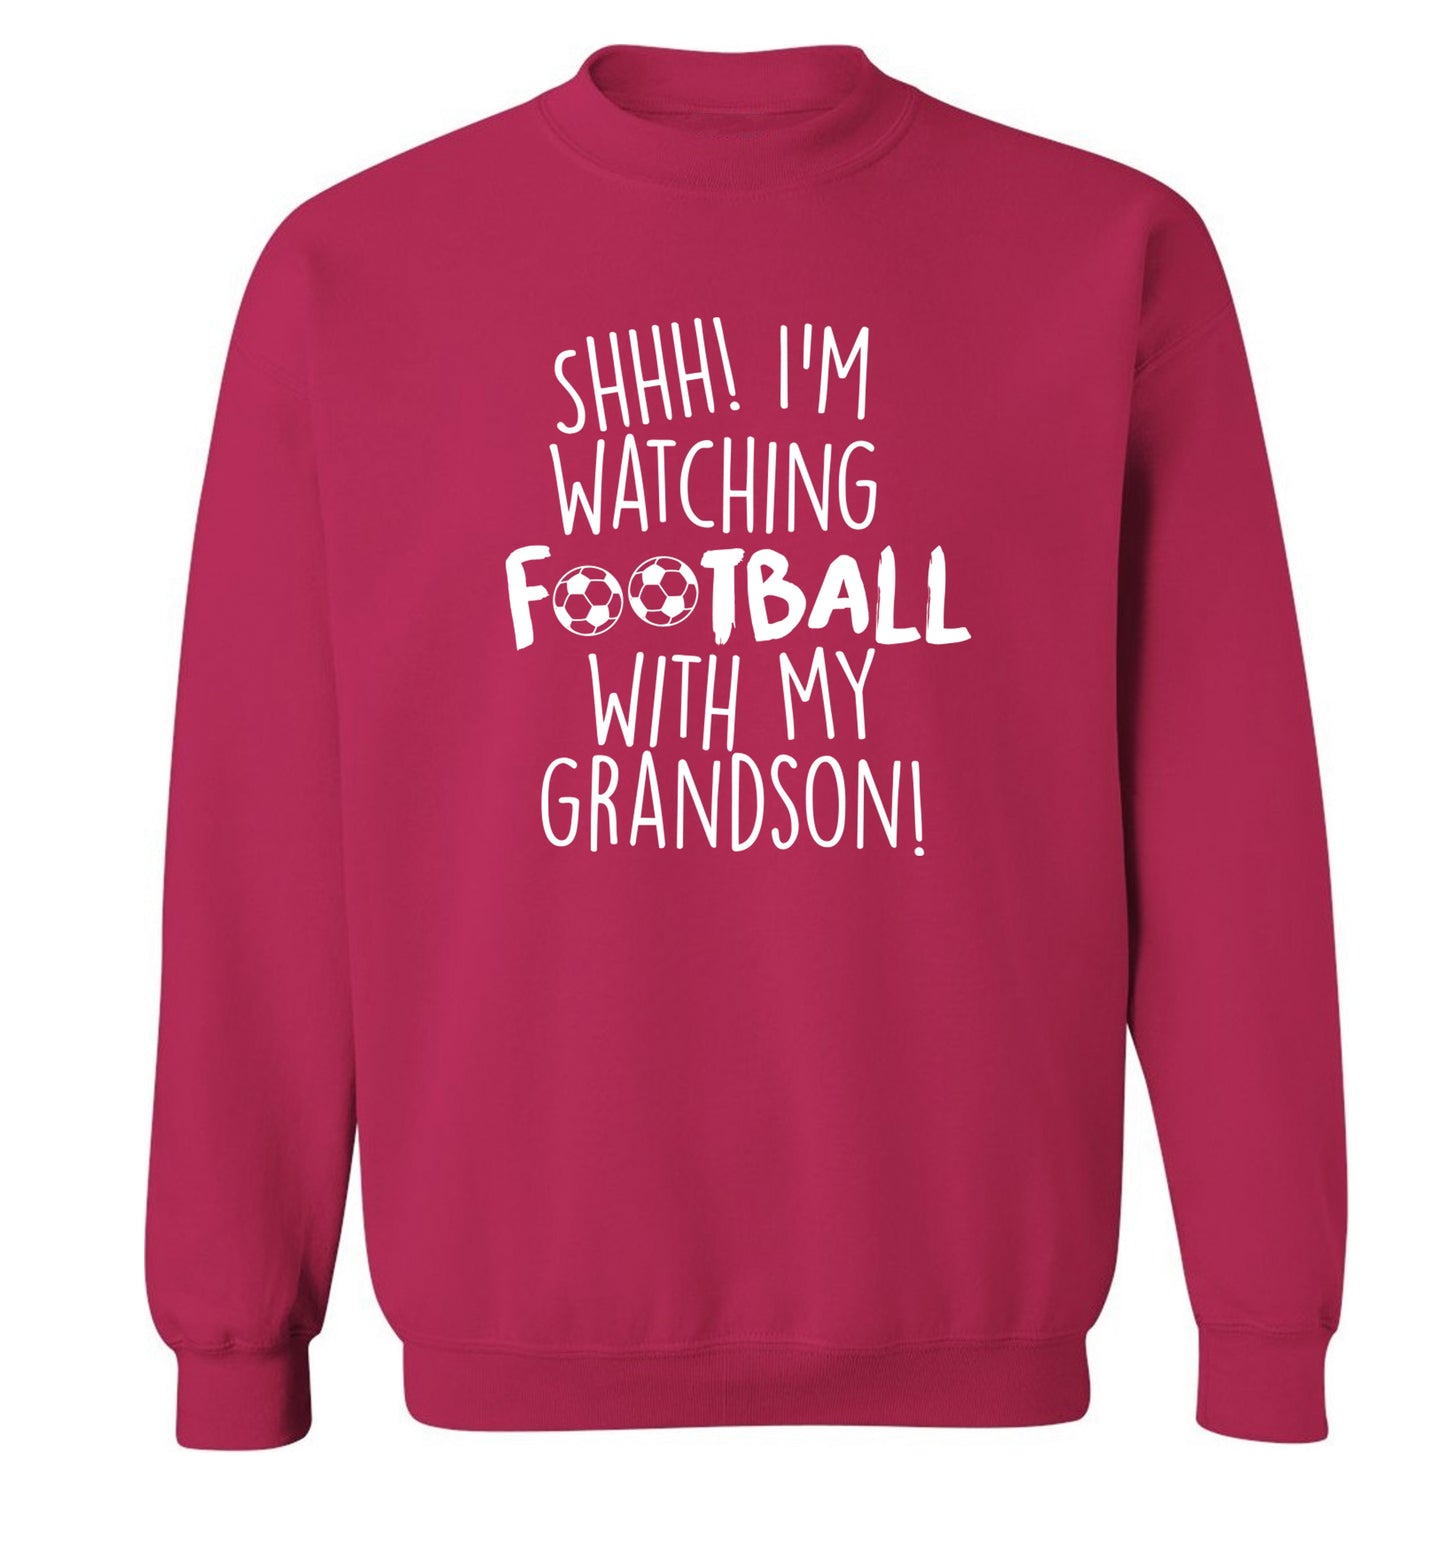 Shhh I'm watching football with my grandson Adult's unisexpink Sweater 2XL